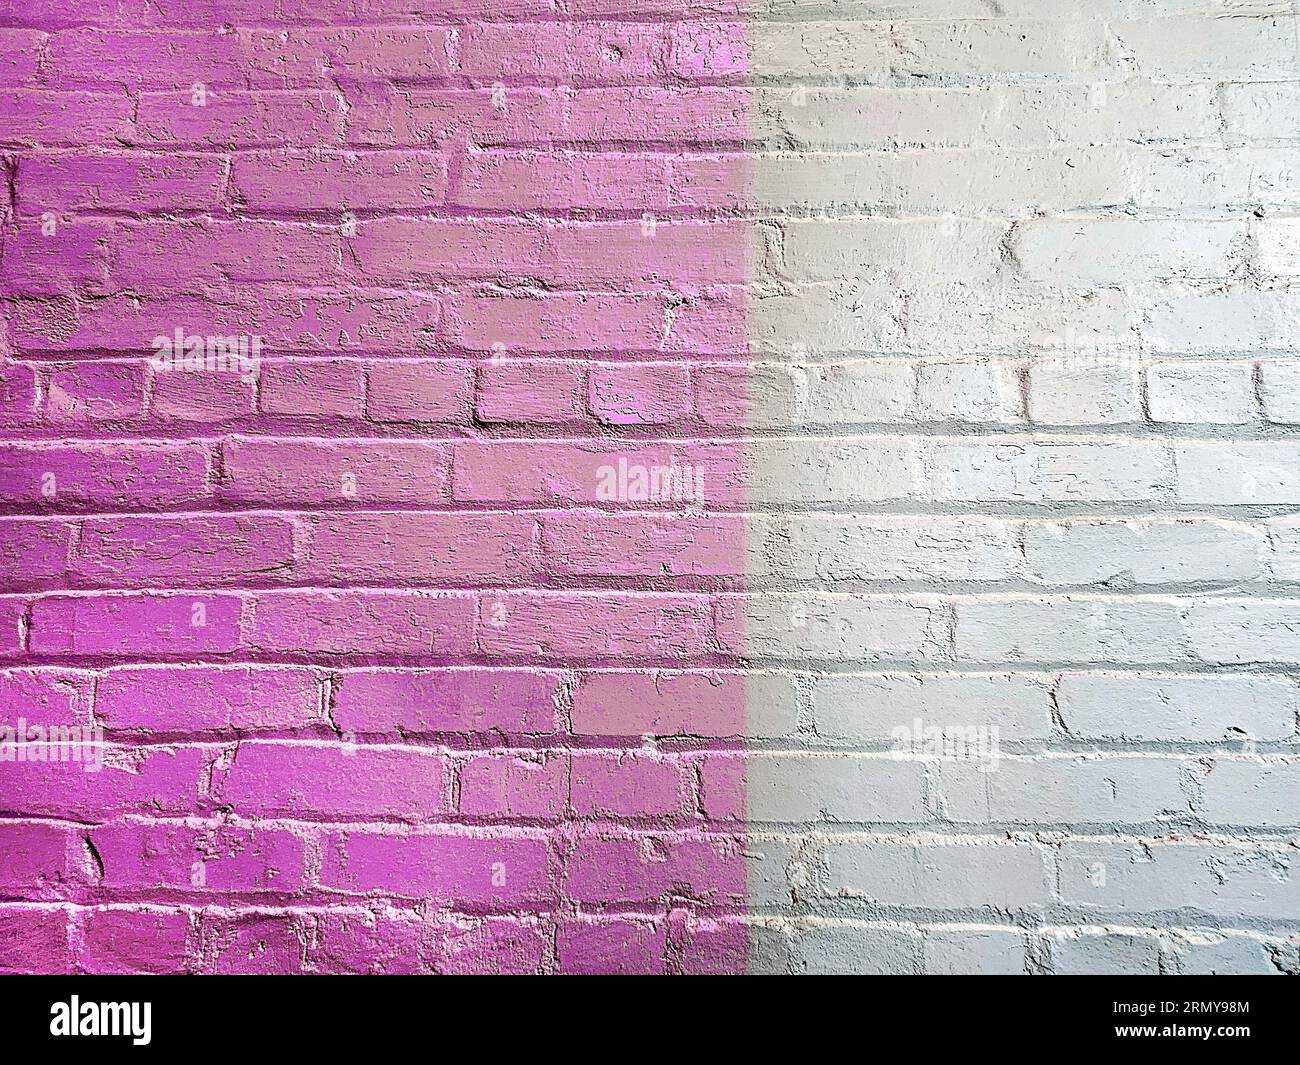 Two-tone pink and silver gray painted brick wall Stock Photo